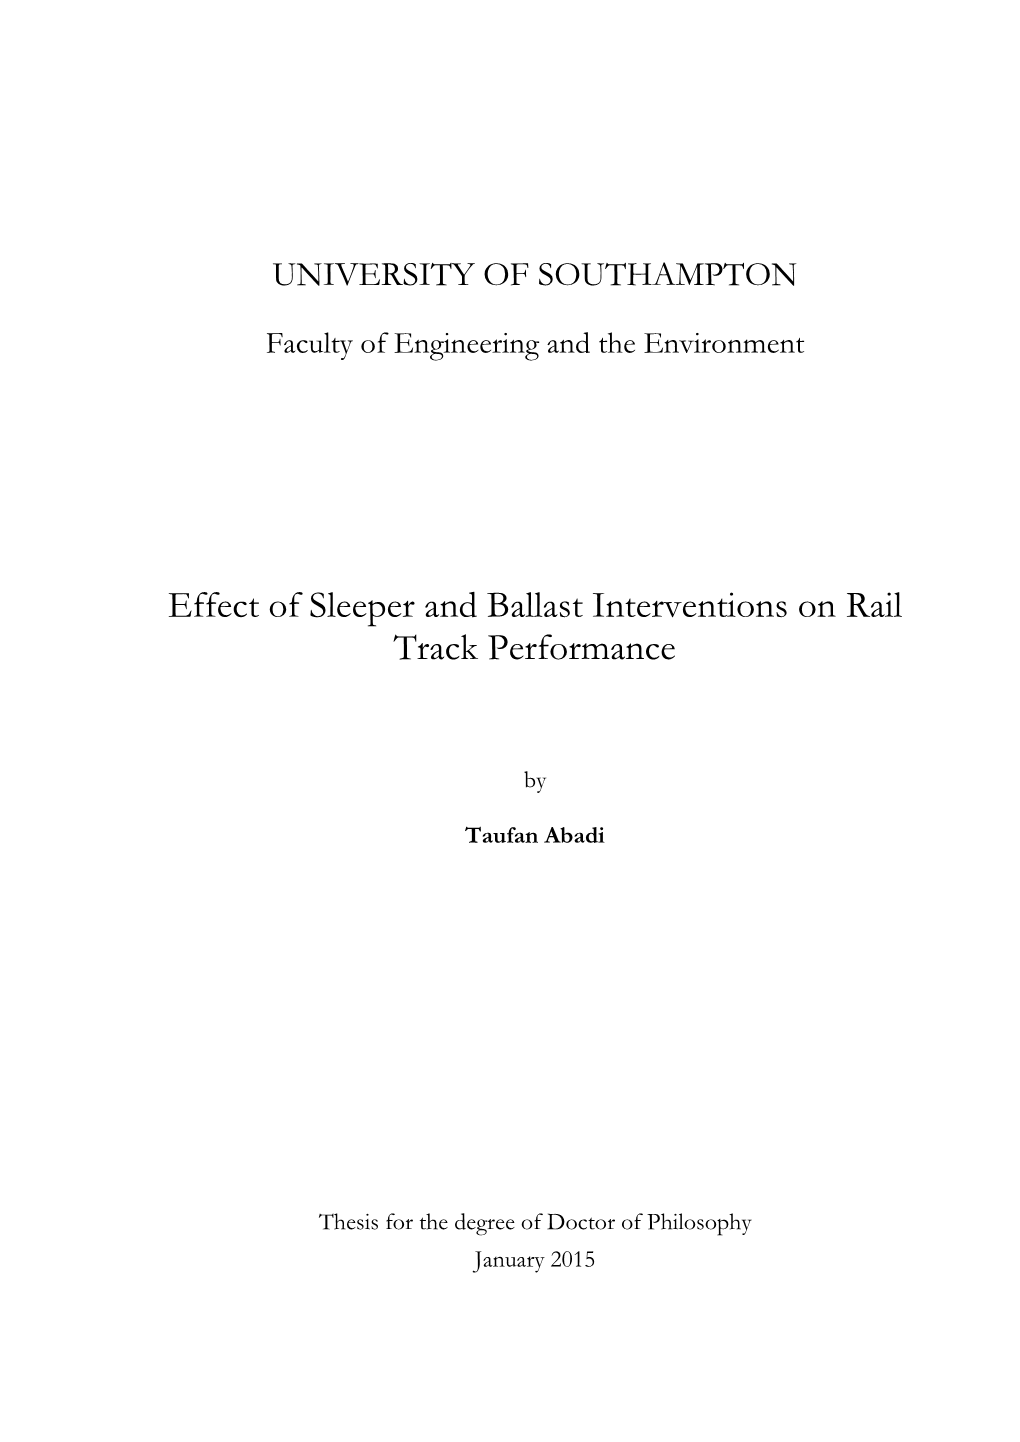 Effect of Sleeper and Ballast Interventions on Rail Track Performance